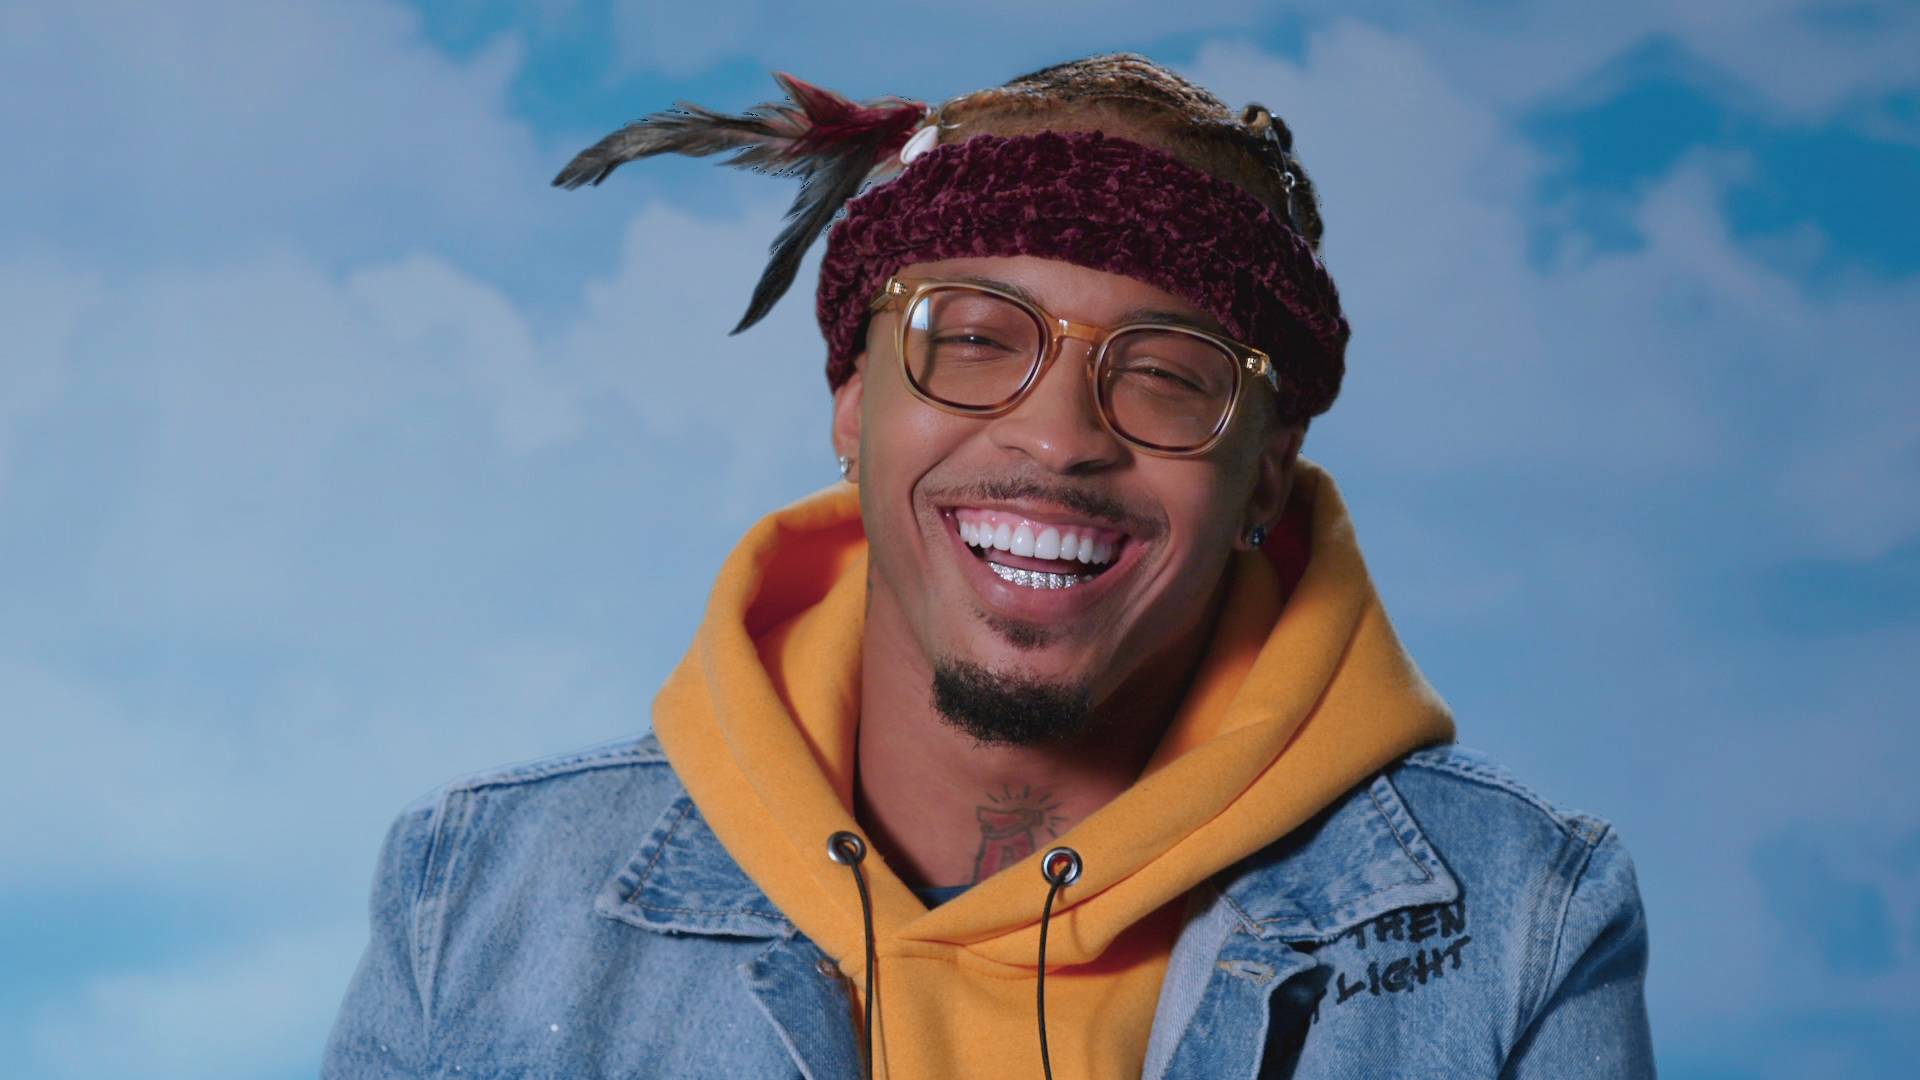 August Alsina on The Surreal Life on VH1.